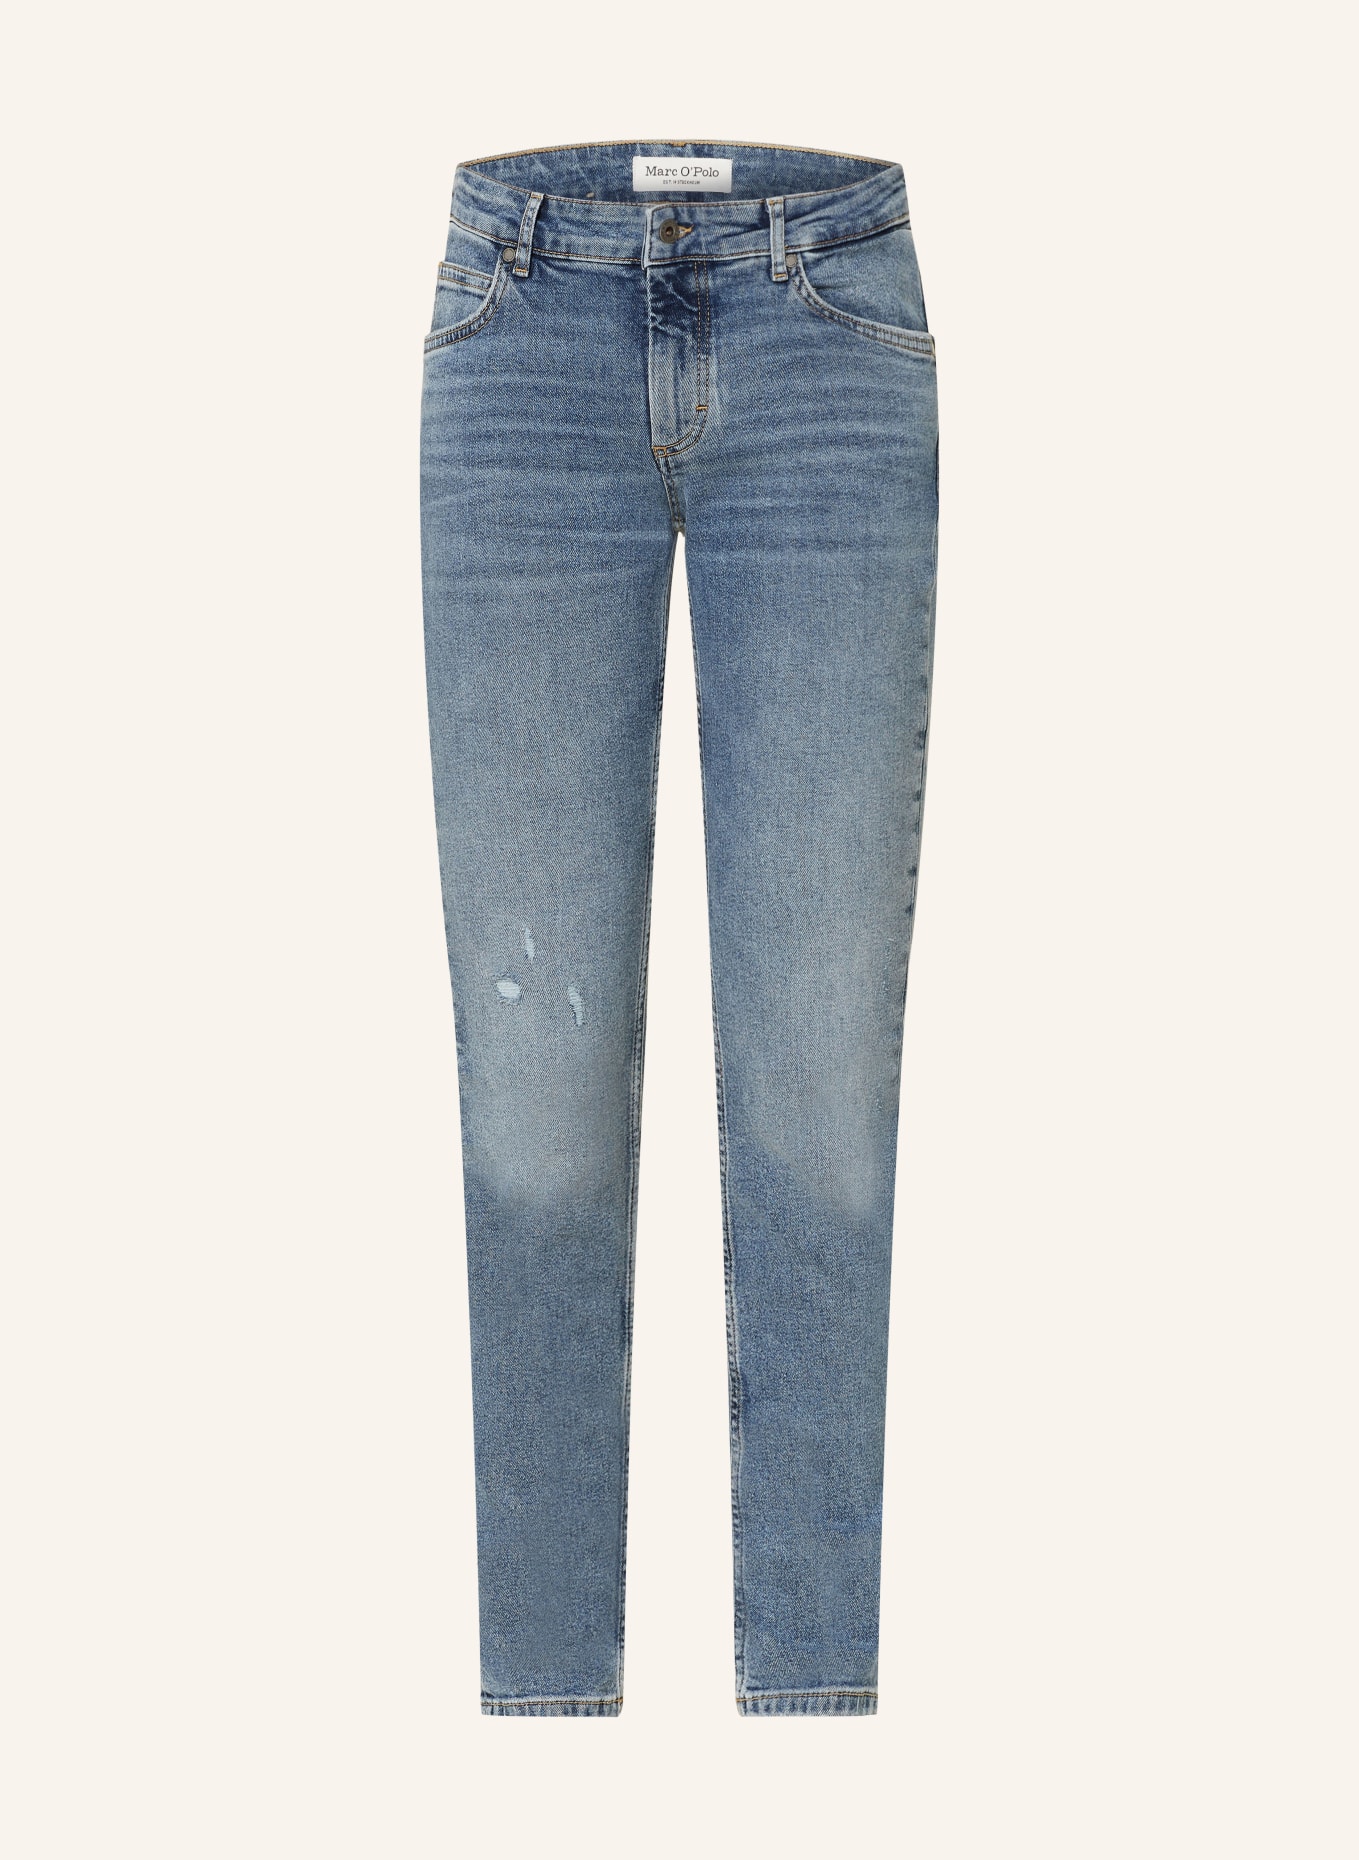 Marc O'Polo Jeans, Color: 028 Mid authentic blue wash (Image 1)